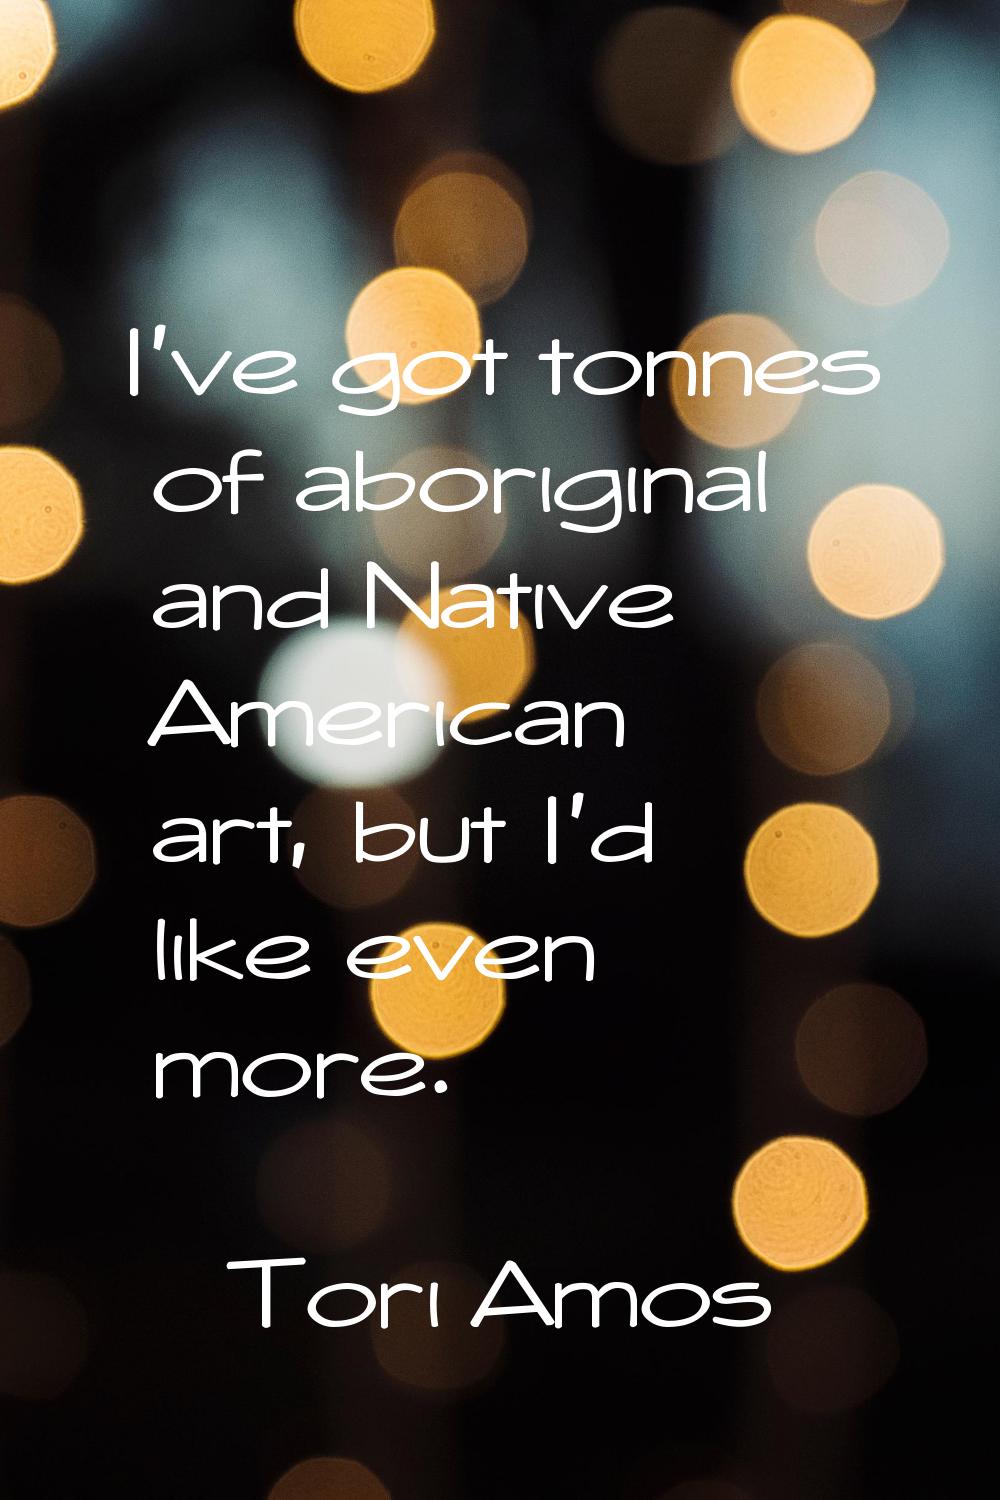 I've got tonnes of aboriginal and Native American art, but I'd like even more.